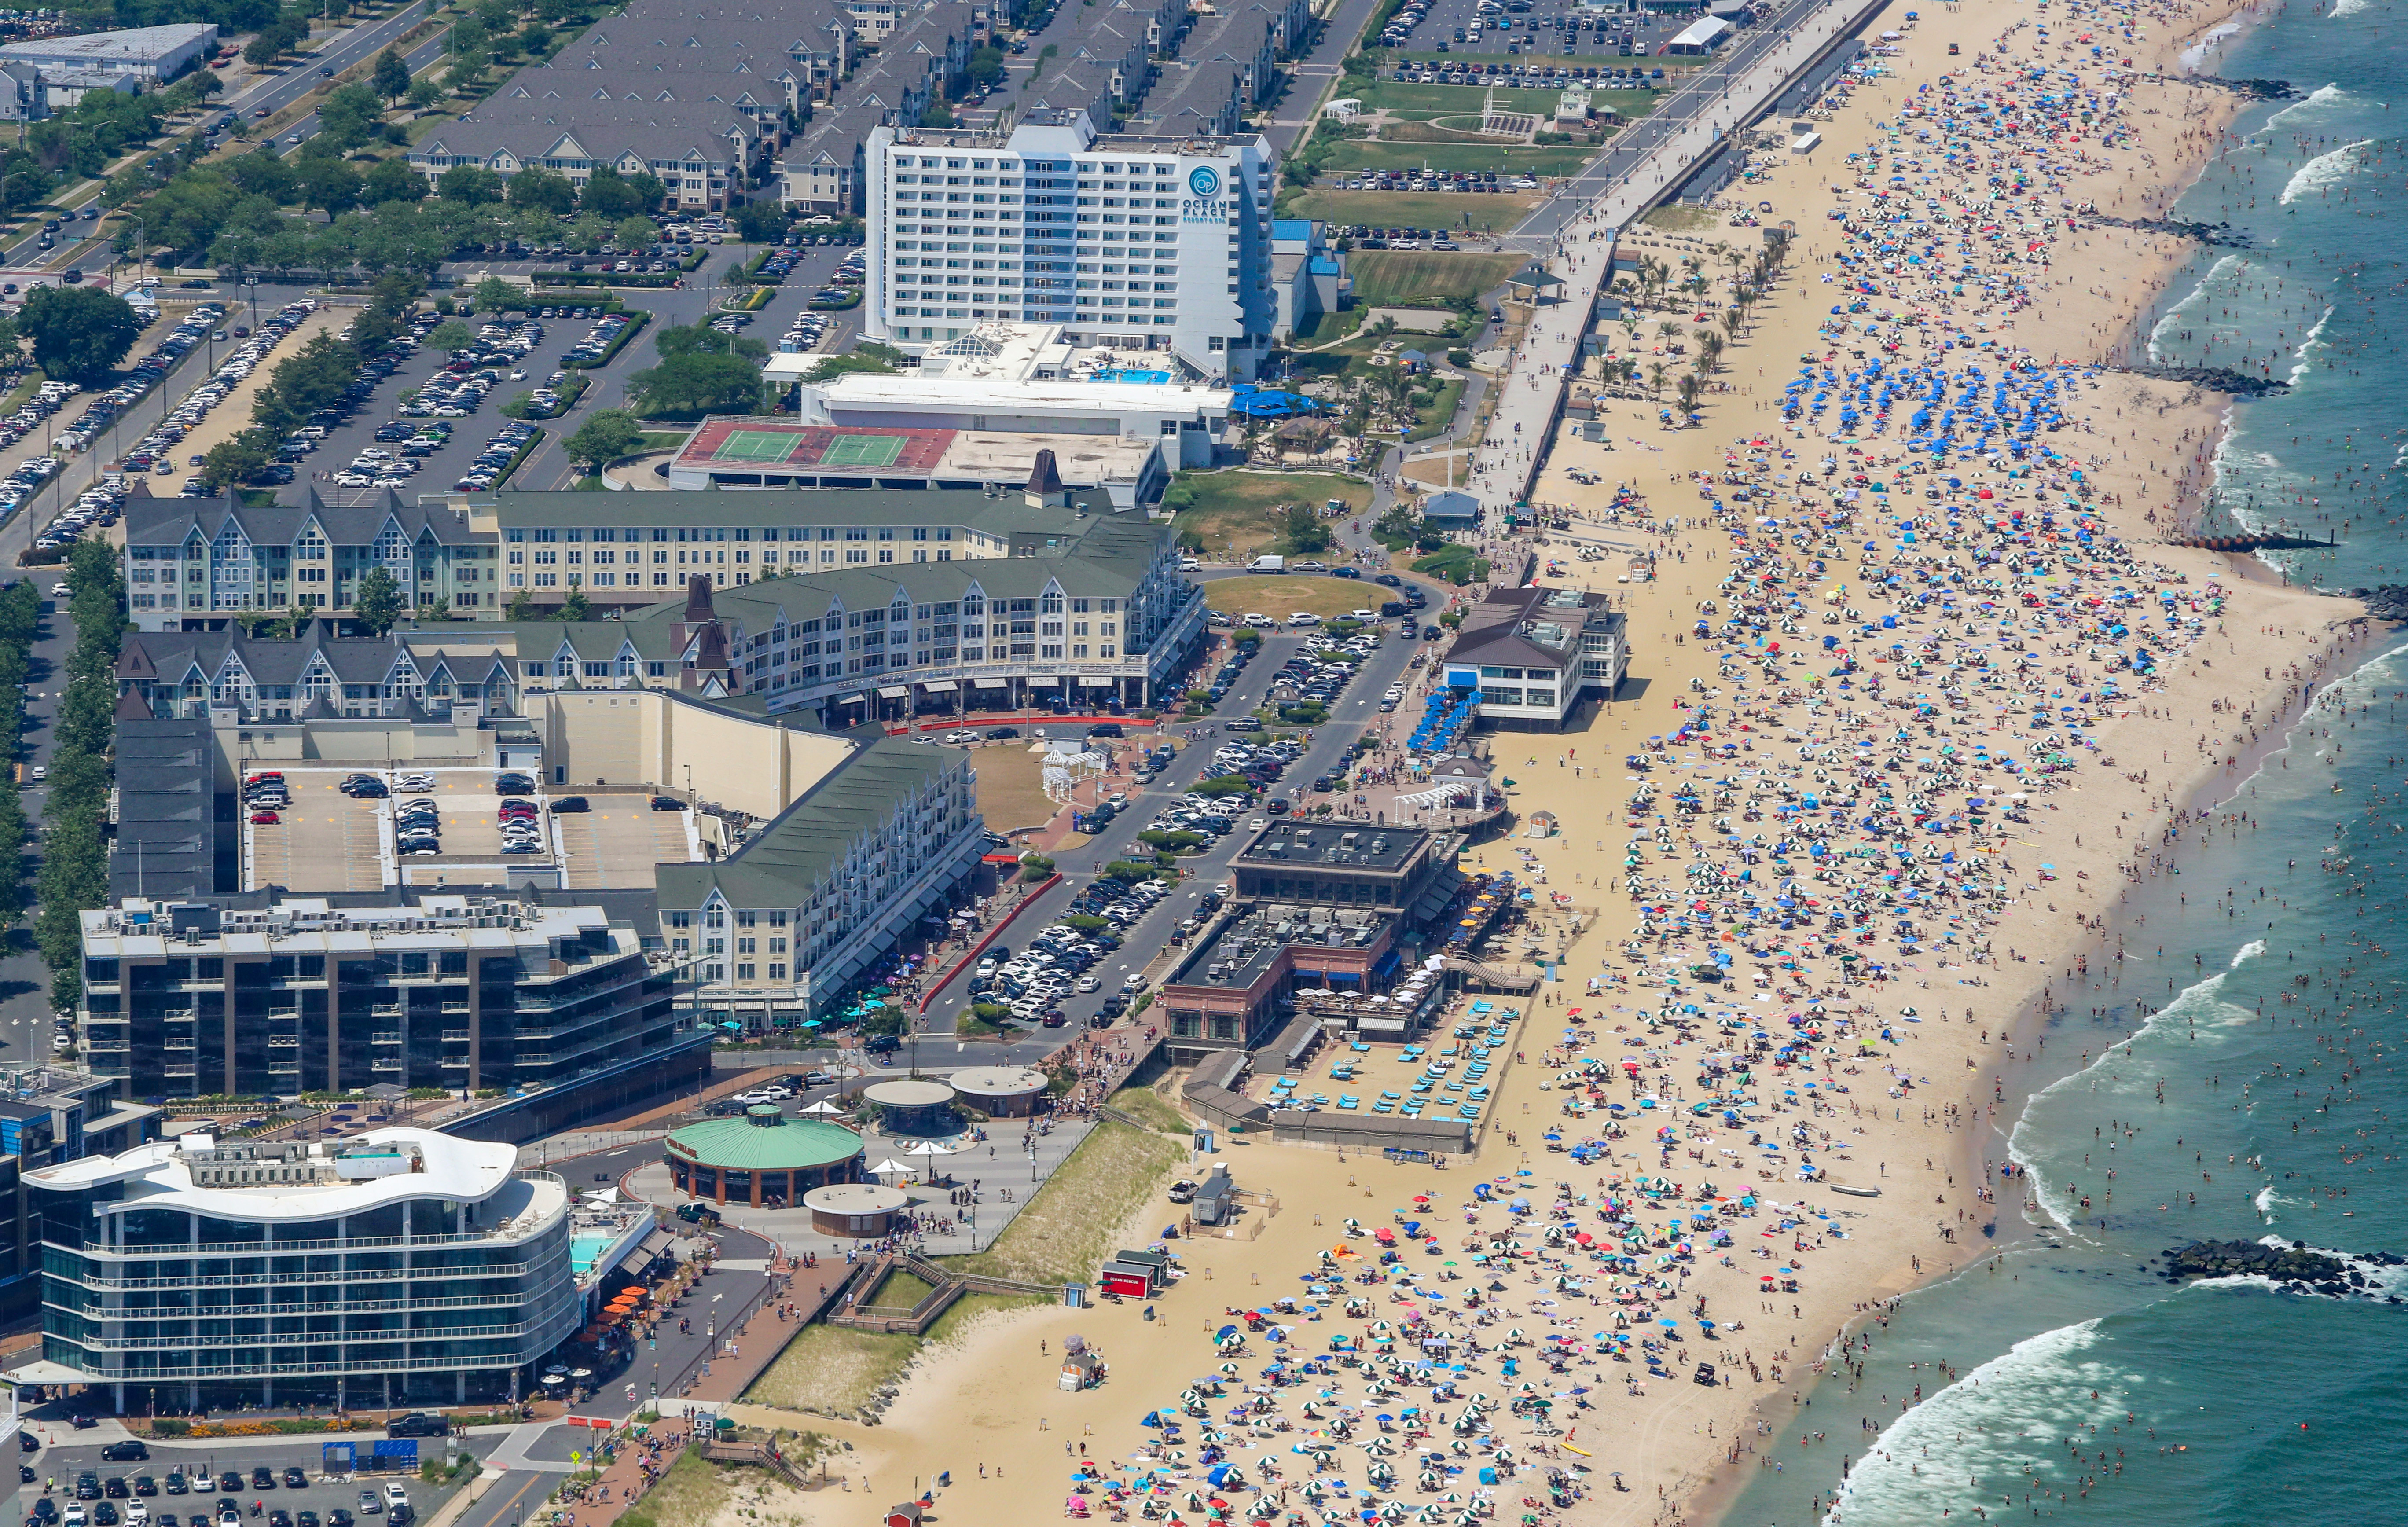 Why not in Long Branch? Young people should be able to enjoy